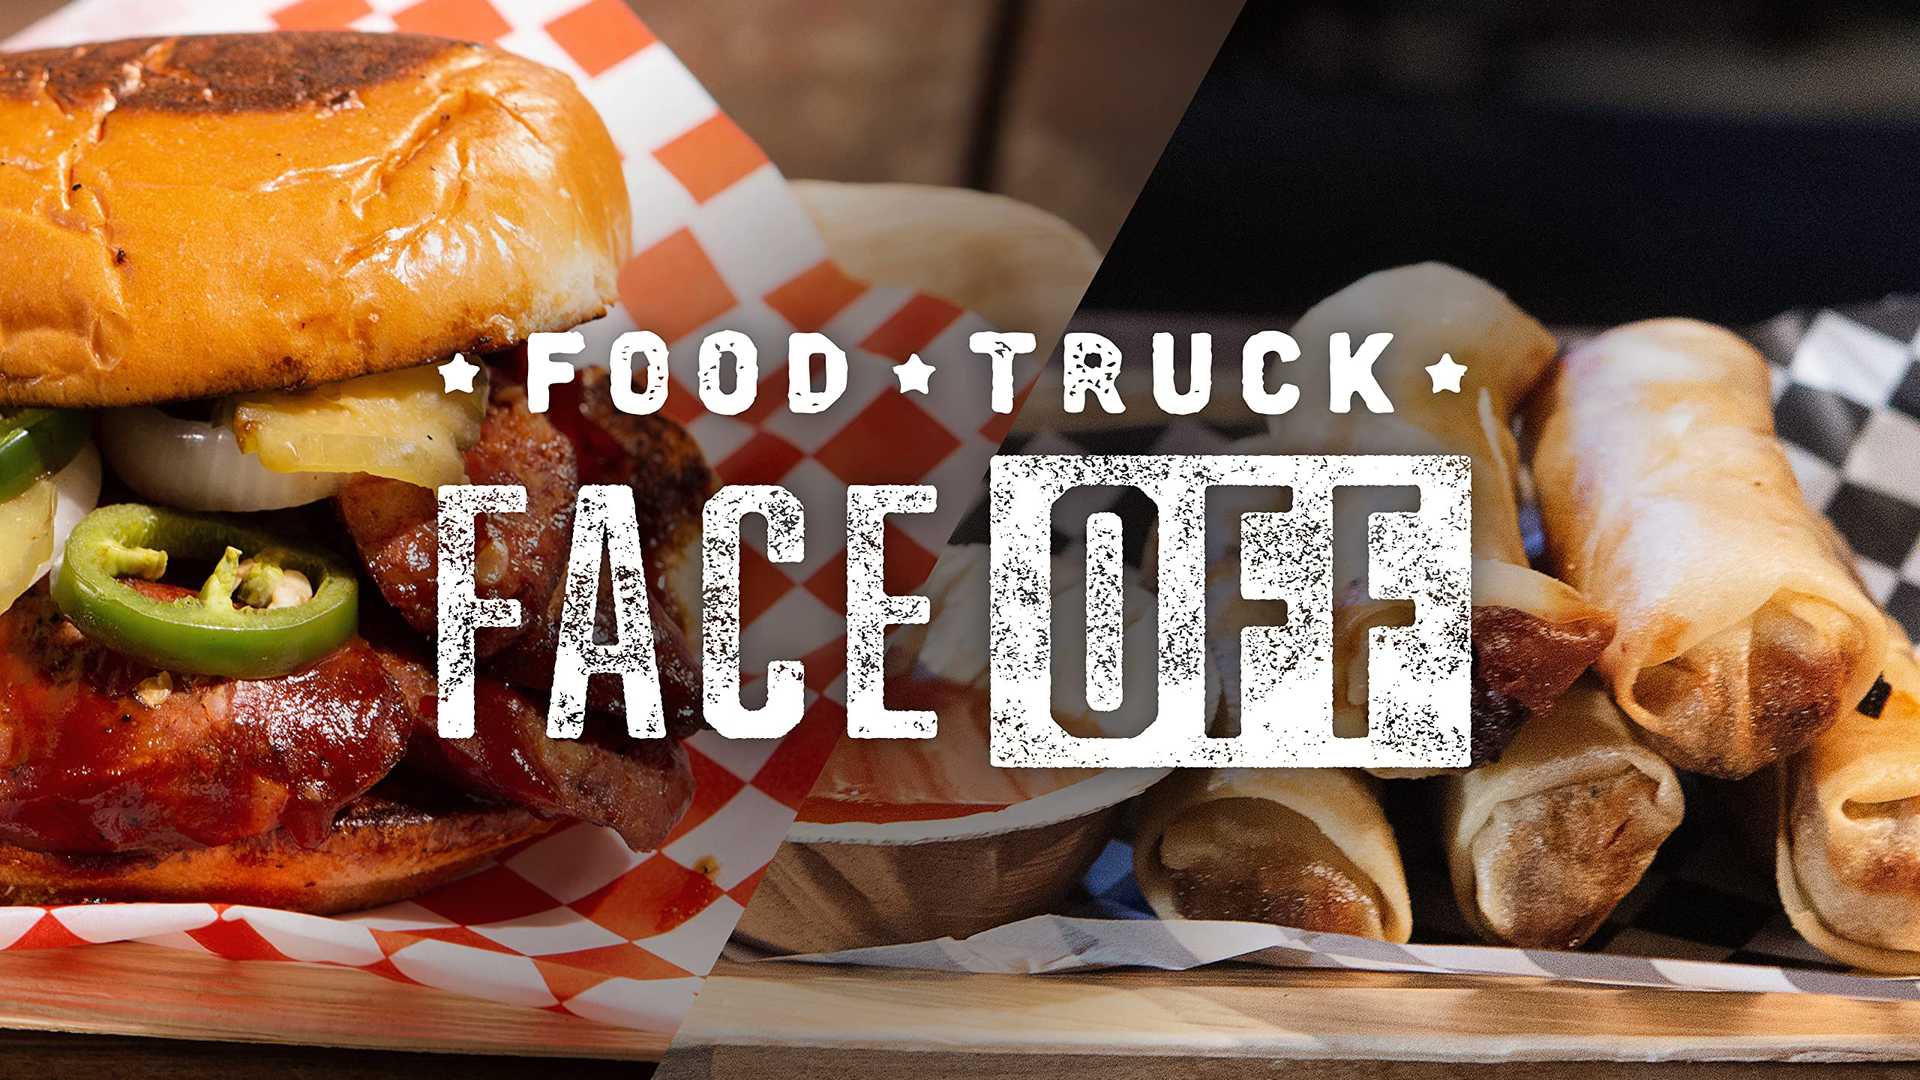 Titlecard for Eddie Jackson's Food Truck Face Off.